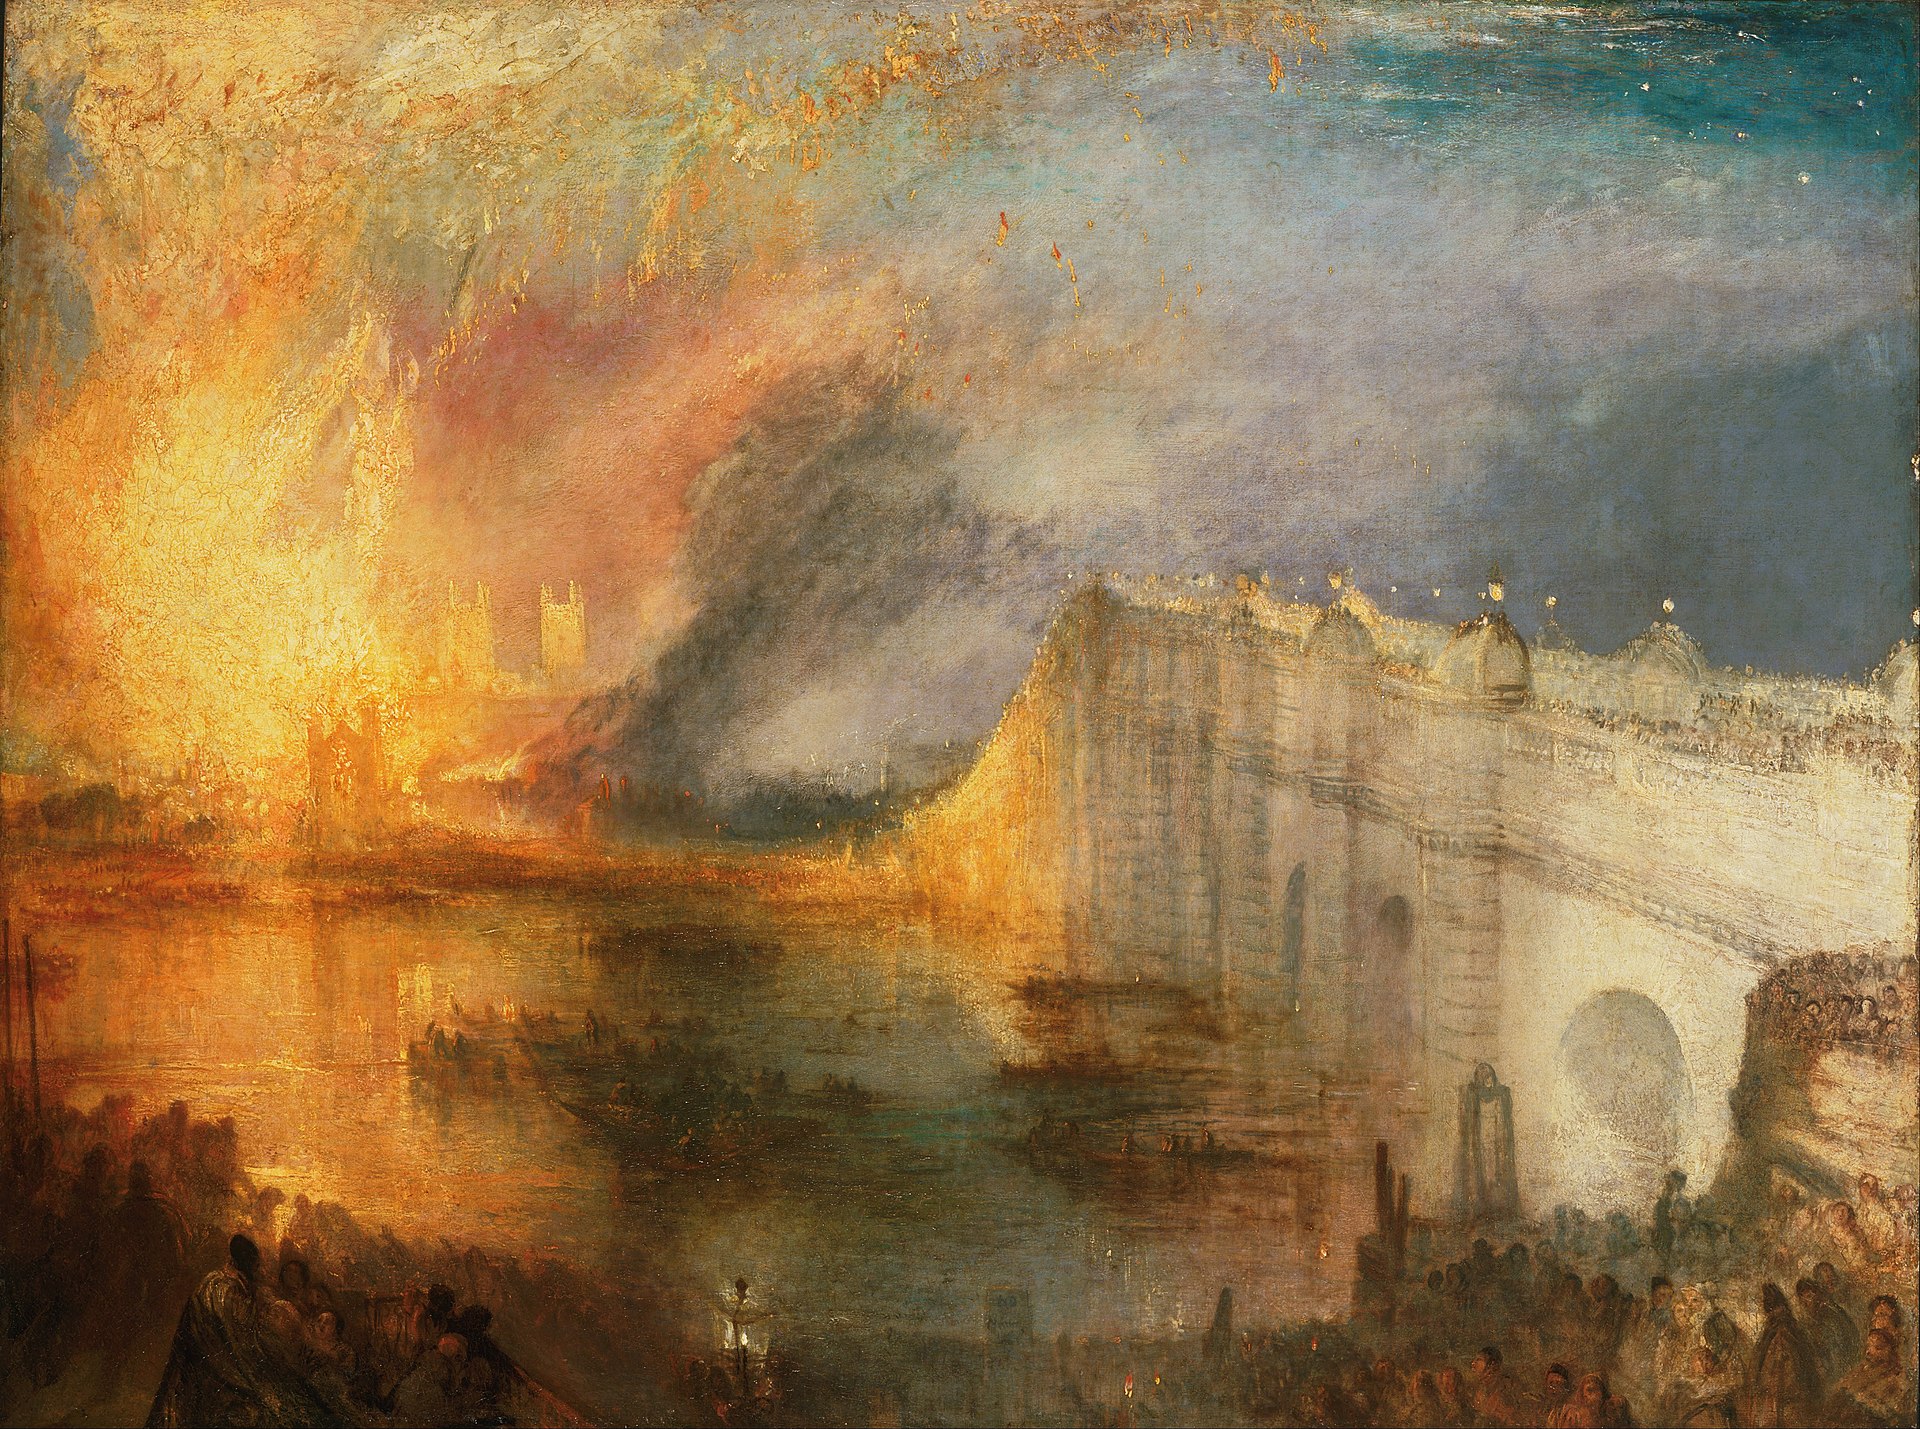 Joseph_Mallord_William_Turner,_English_-_The_Burning_of_the_Houses_of_Lords_and_Commons,_October_16,_1834_-_Google_Art_Project